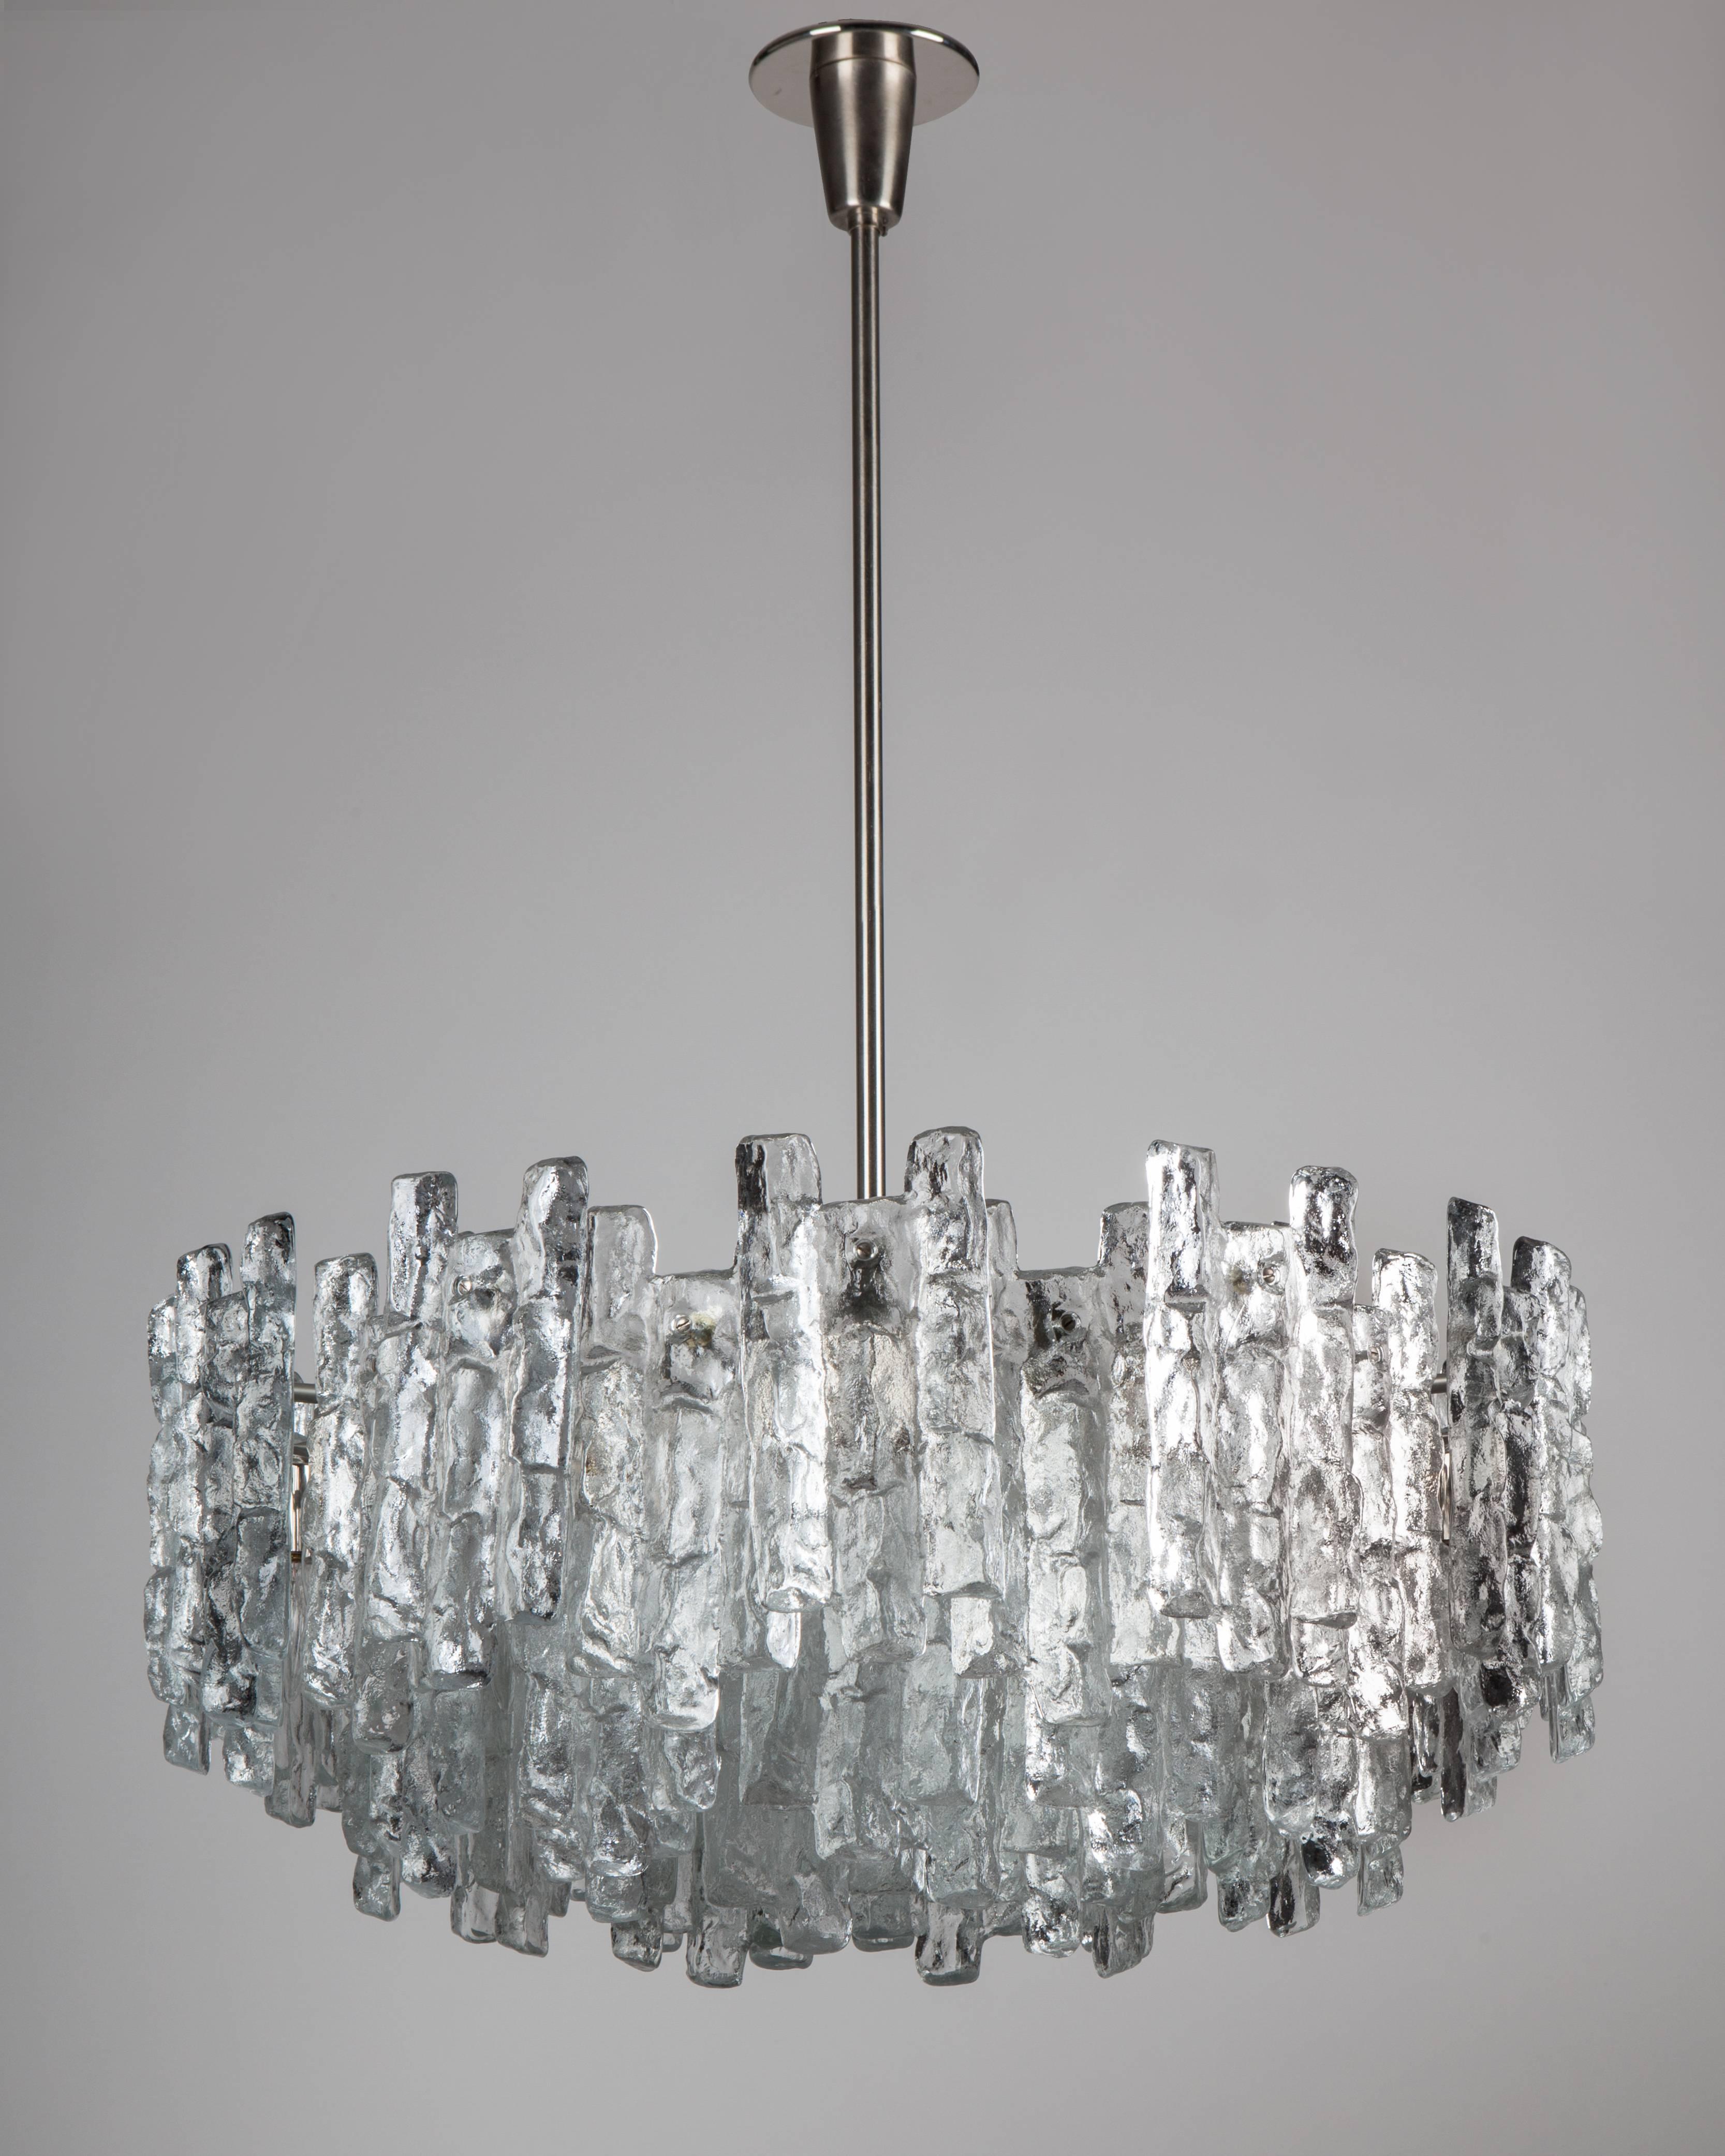 AHL3993

An exceptionally large vintage mid century modern ice chandelier with old nickel metalwork by the Austrian glassmaker Kalmar. Due to the antique nature of this fixture and there may be some nicks or imperfections in the